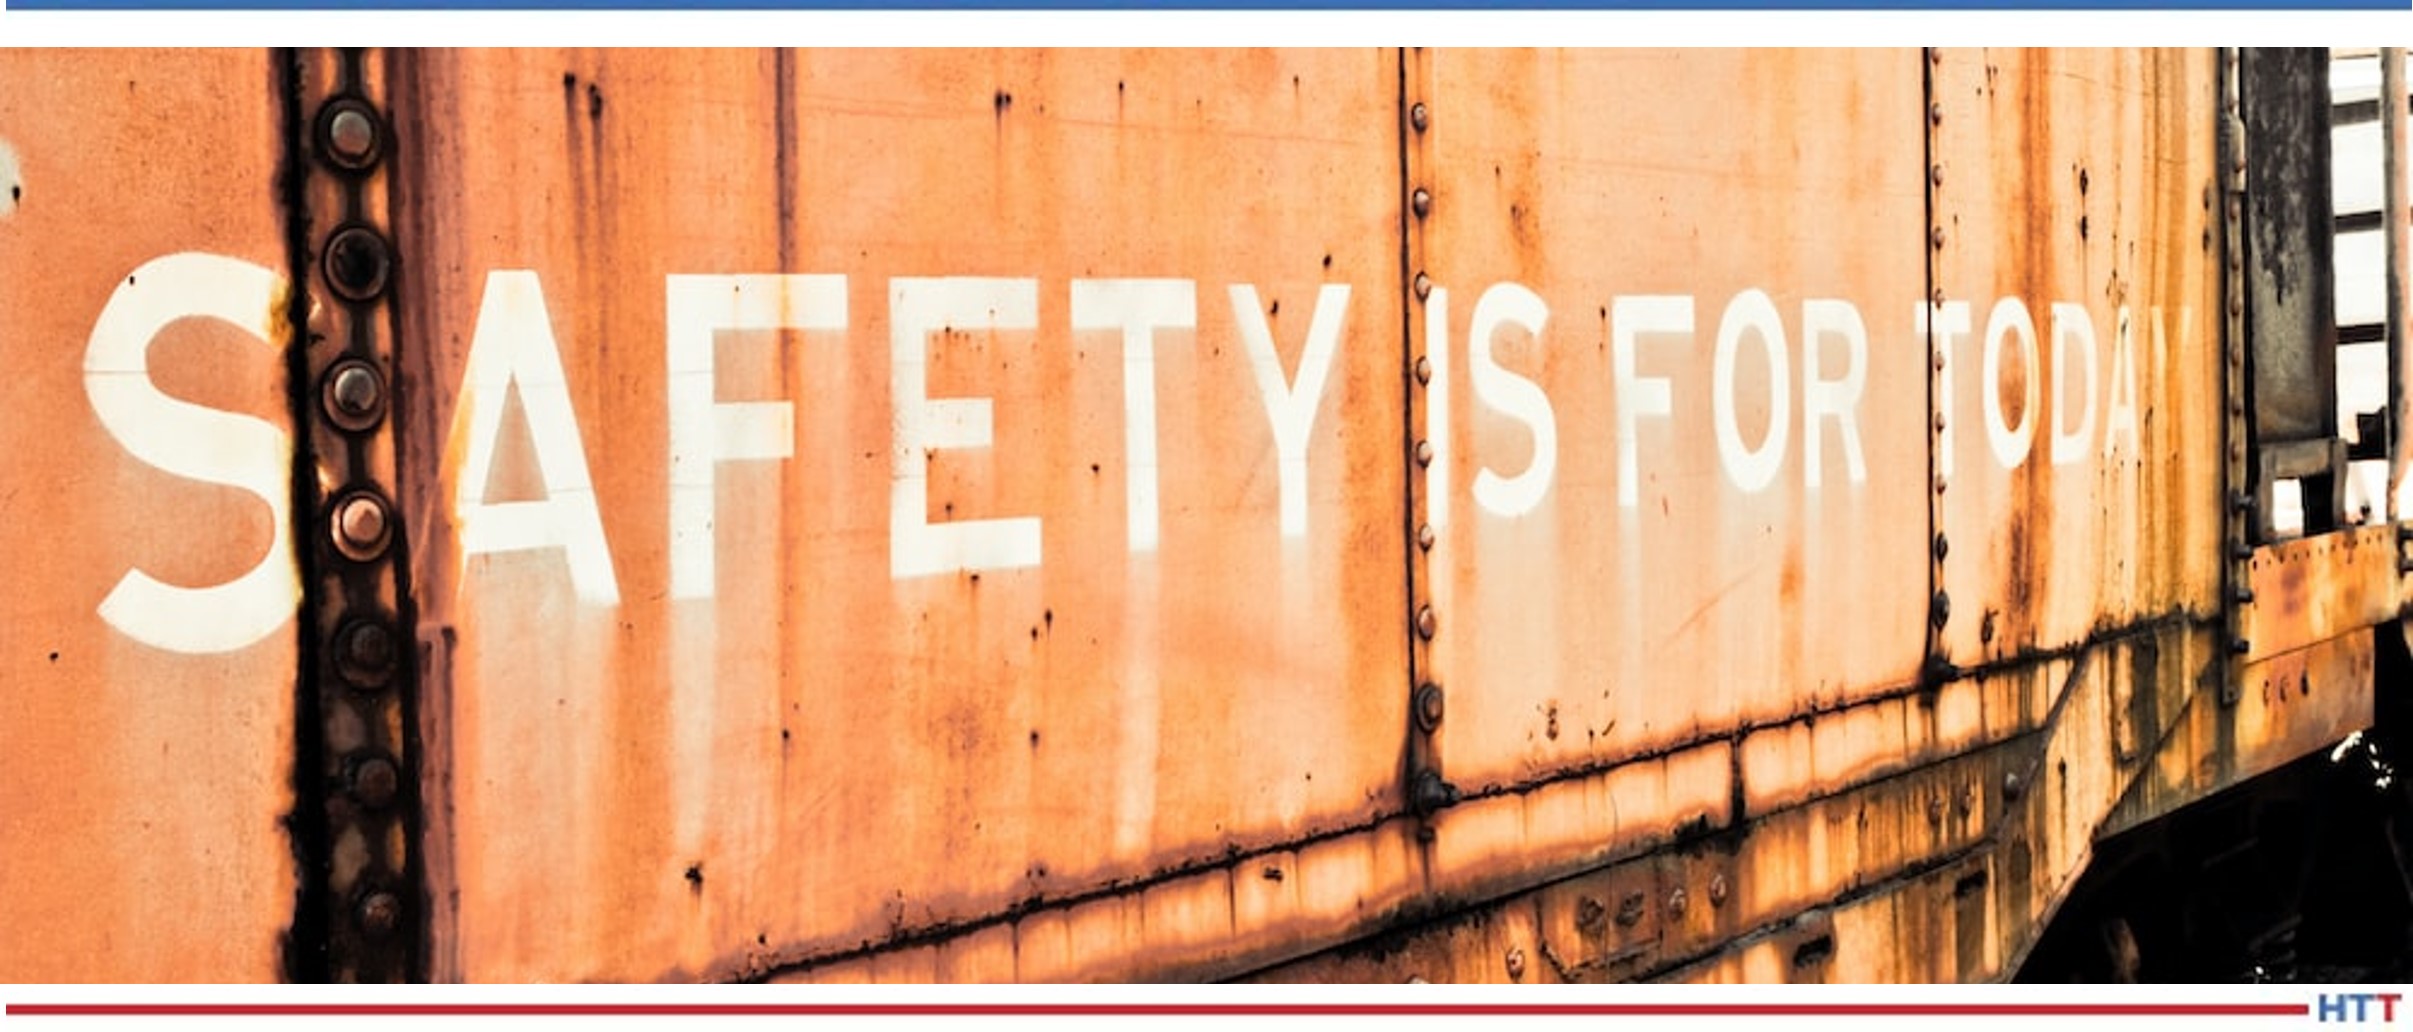 Rusty train with the words “Safety is for today”